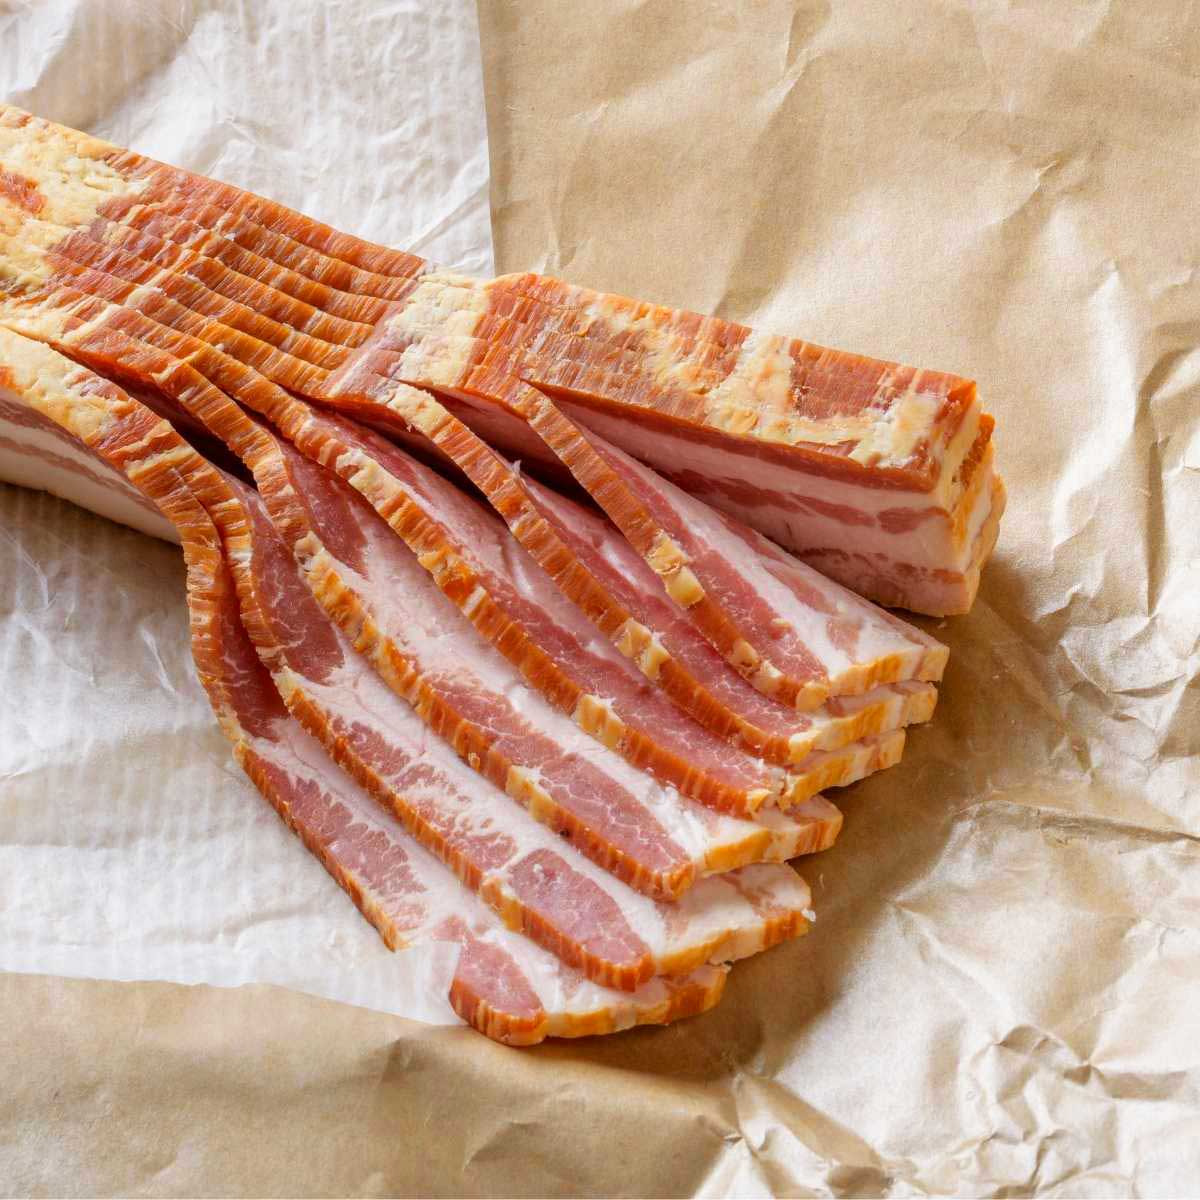 10 slices of raw bacon on a piece of butcher paper